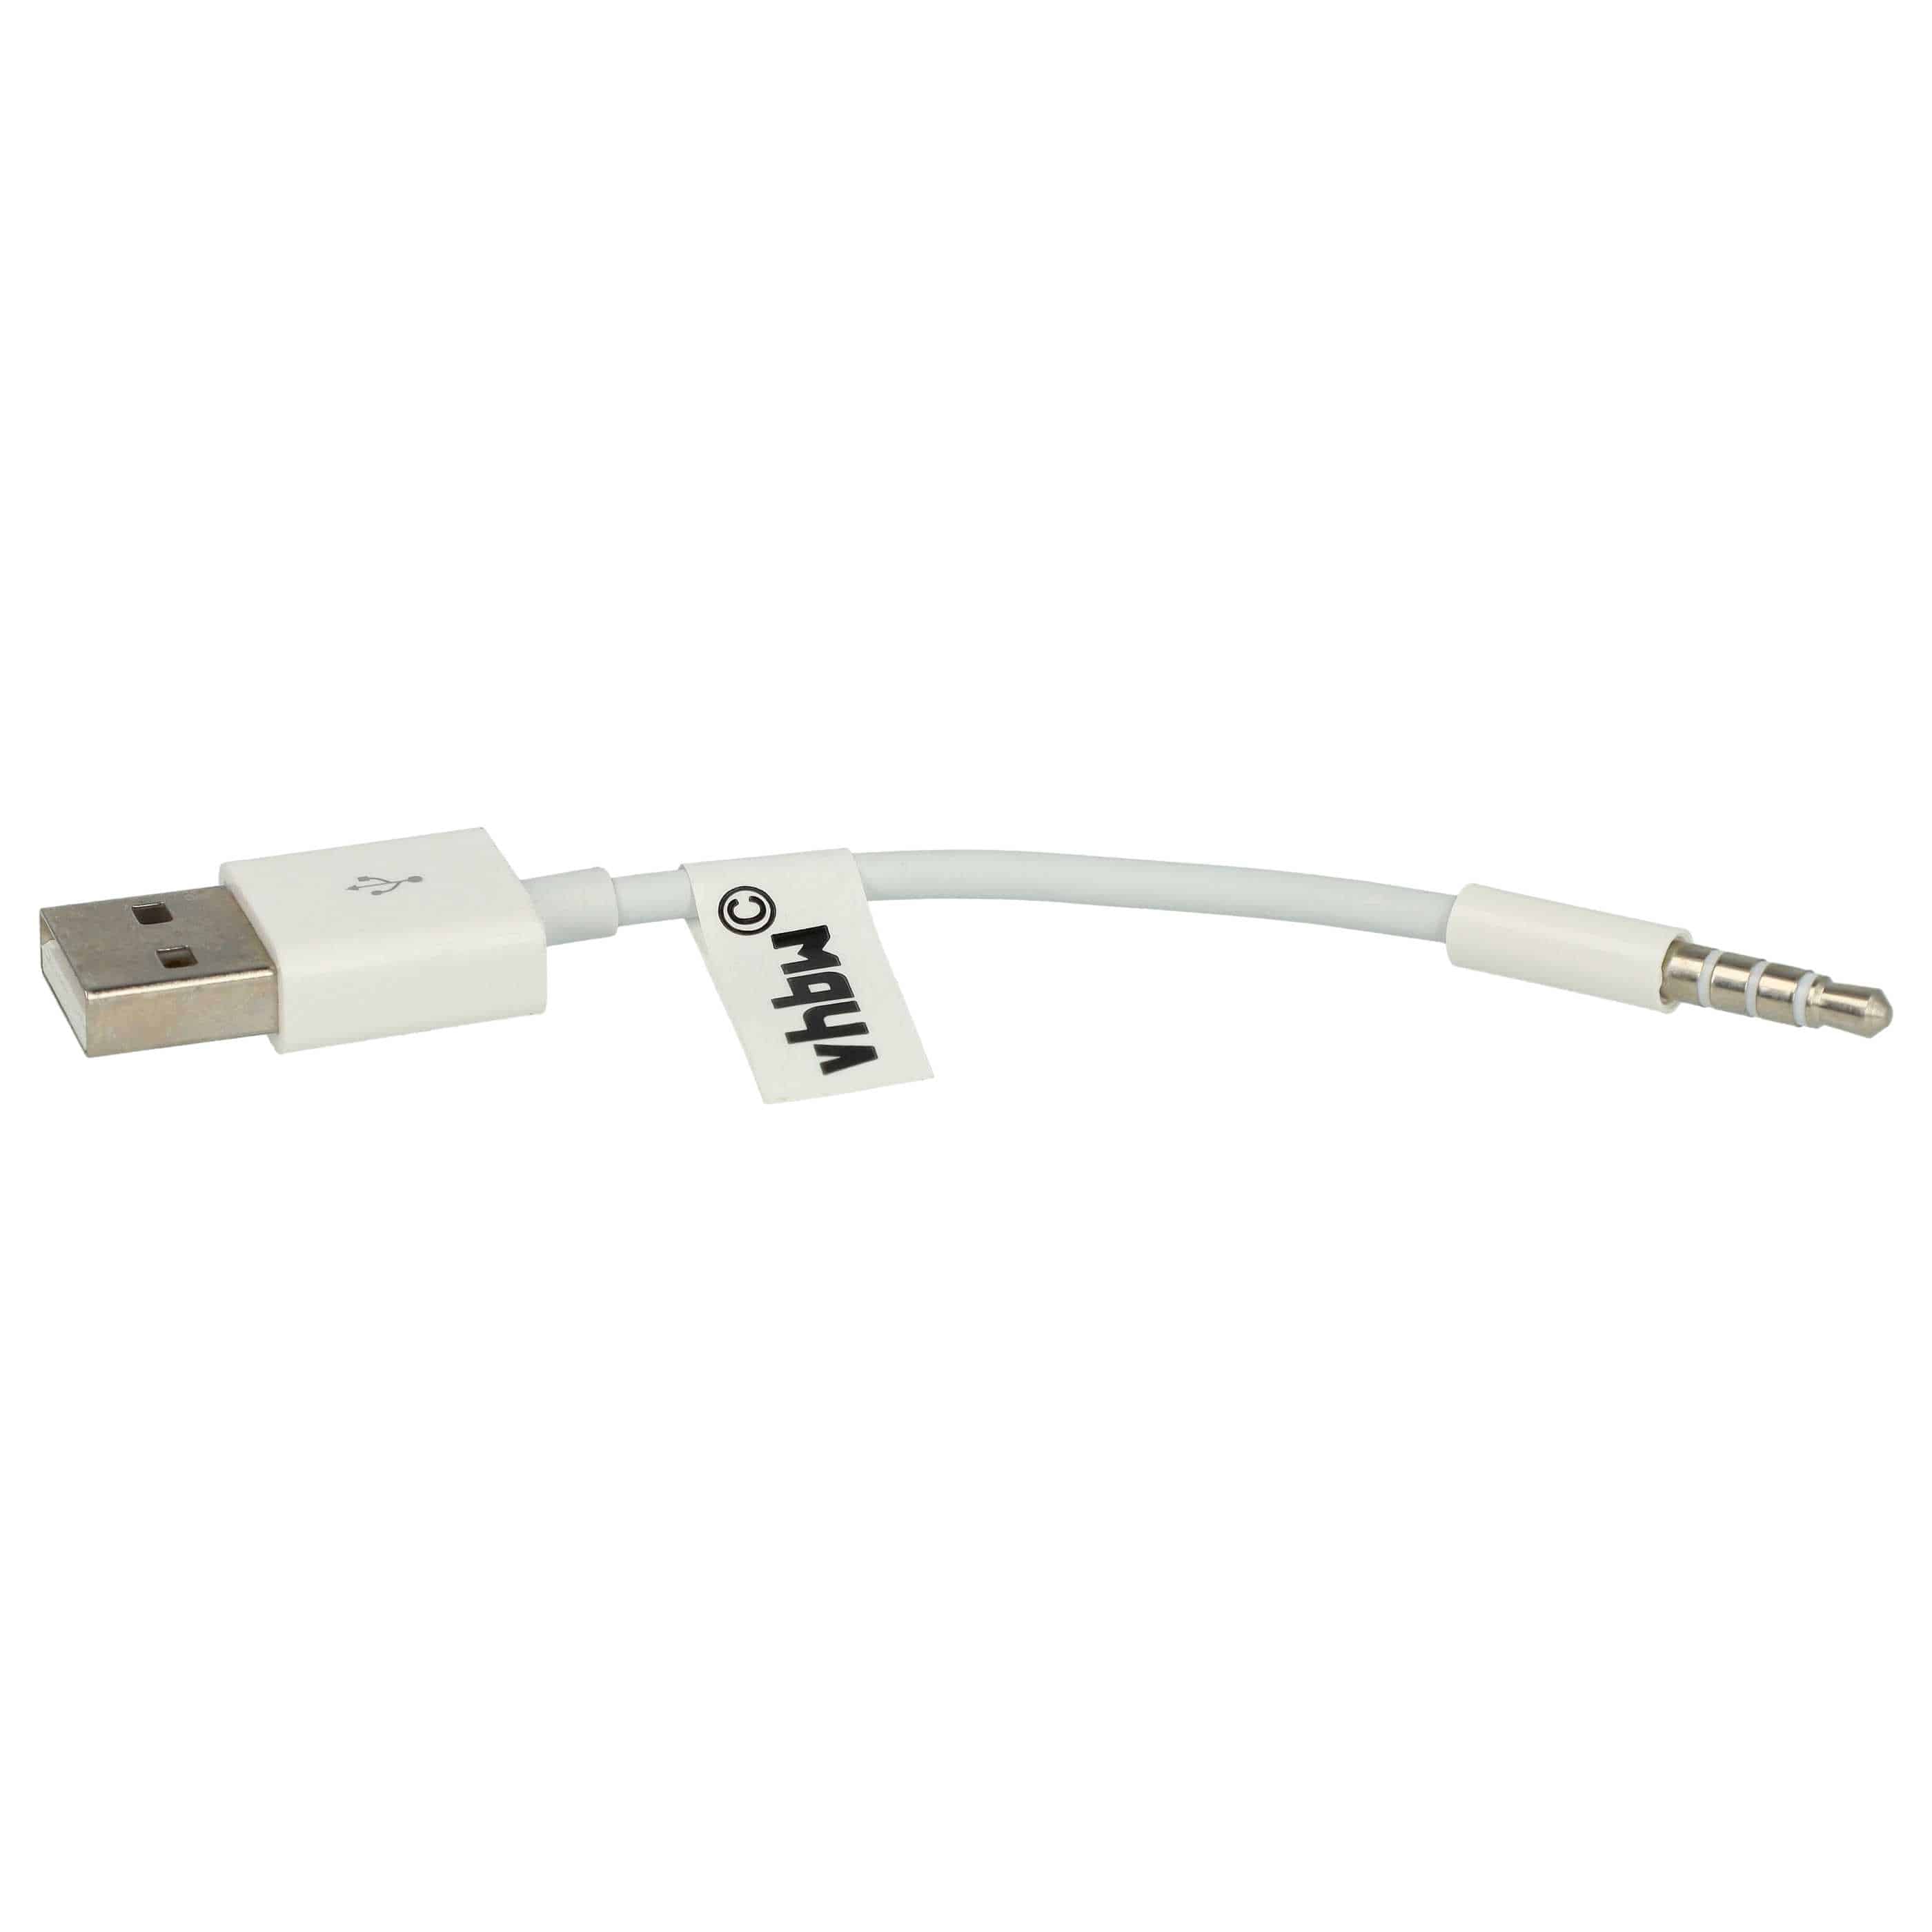 USB Data Cable Charging Cable suitable for Dr. Dre / Apple Beats etc.